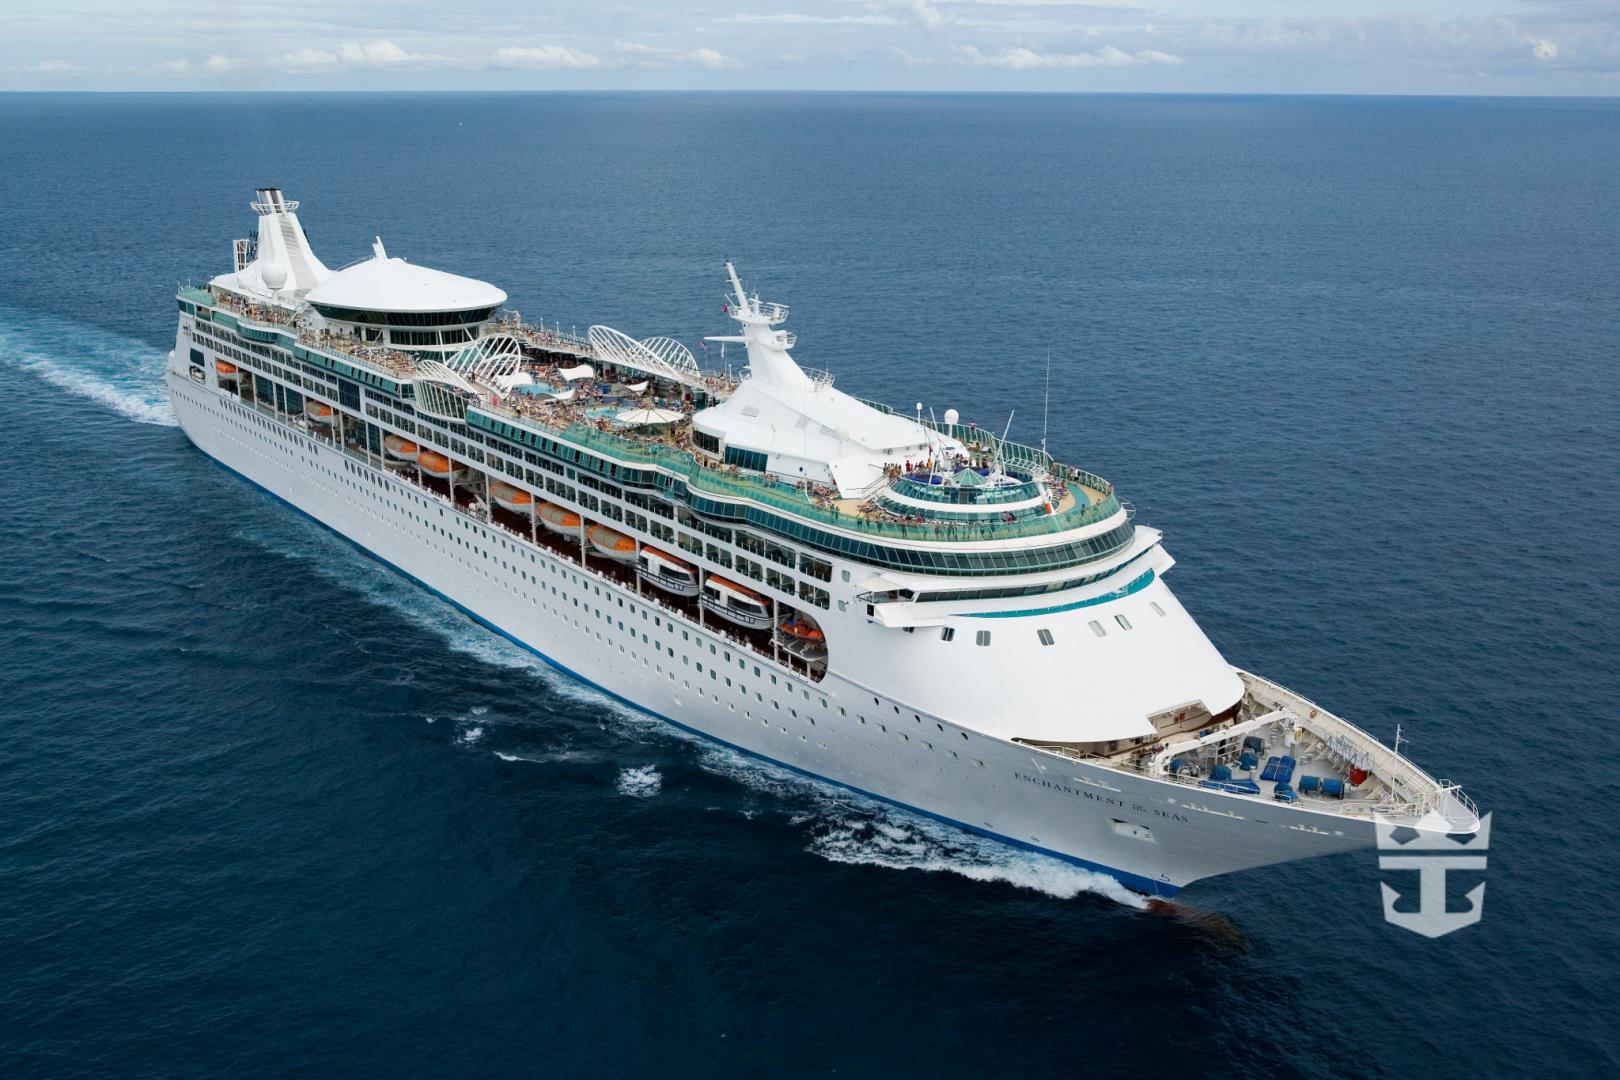 Aerial of Enchantment of the Seas